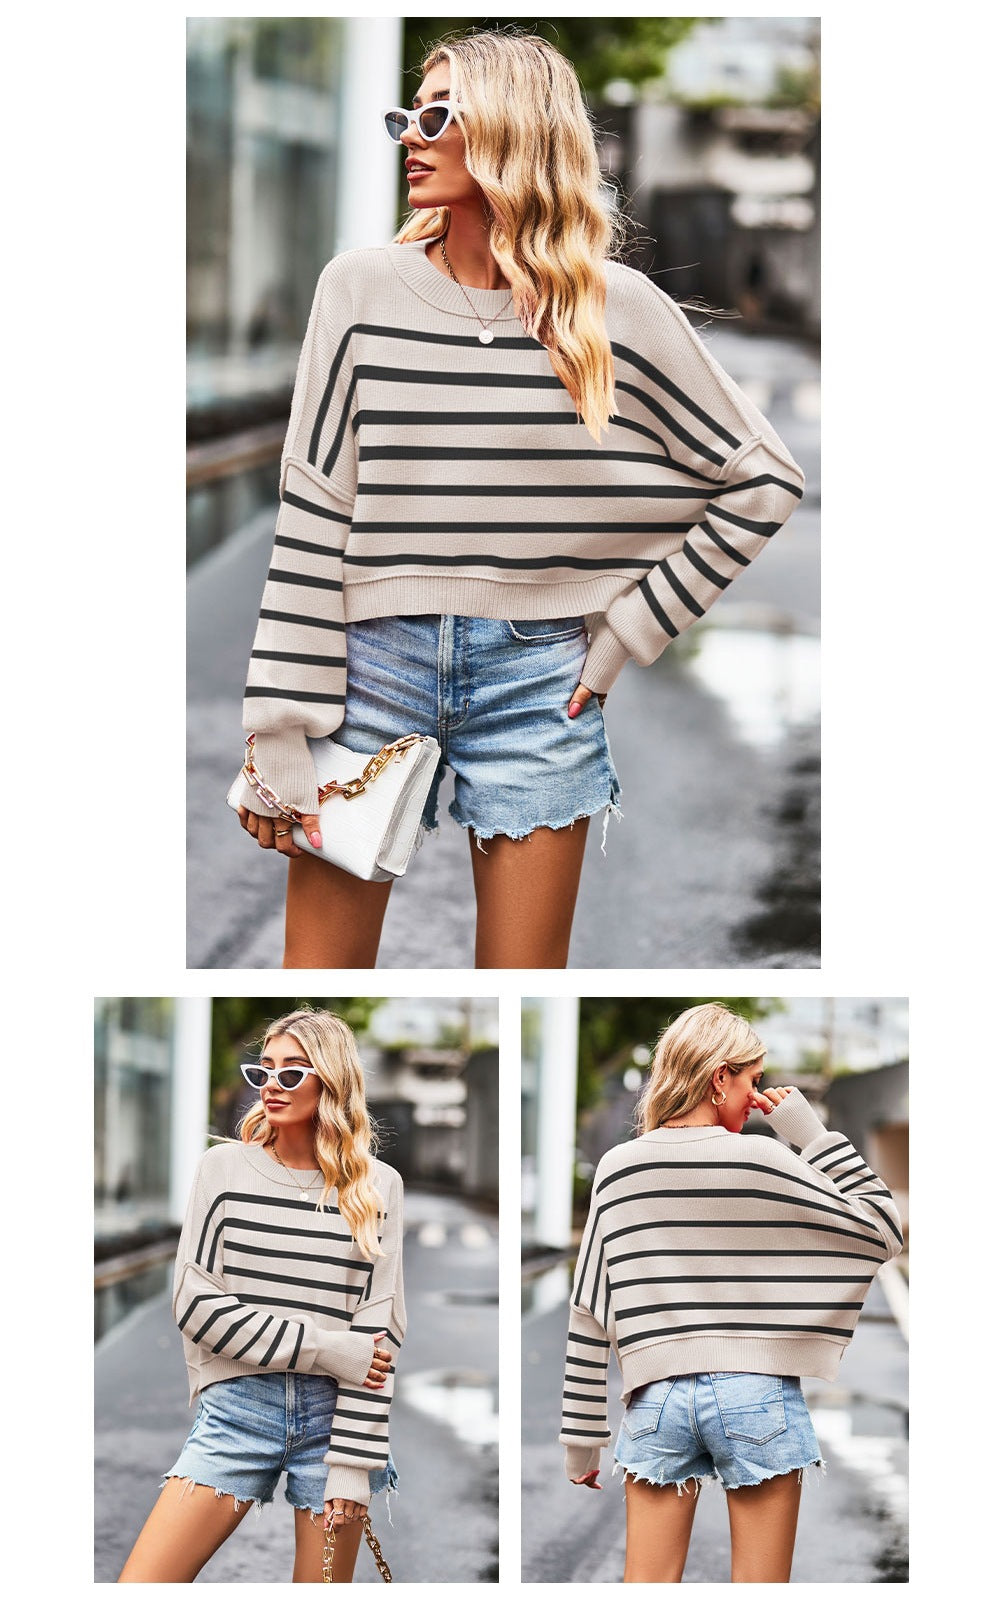 Fashion Round Neck Knitted Pullover Sweaters